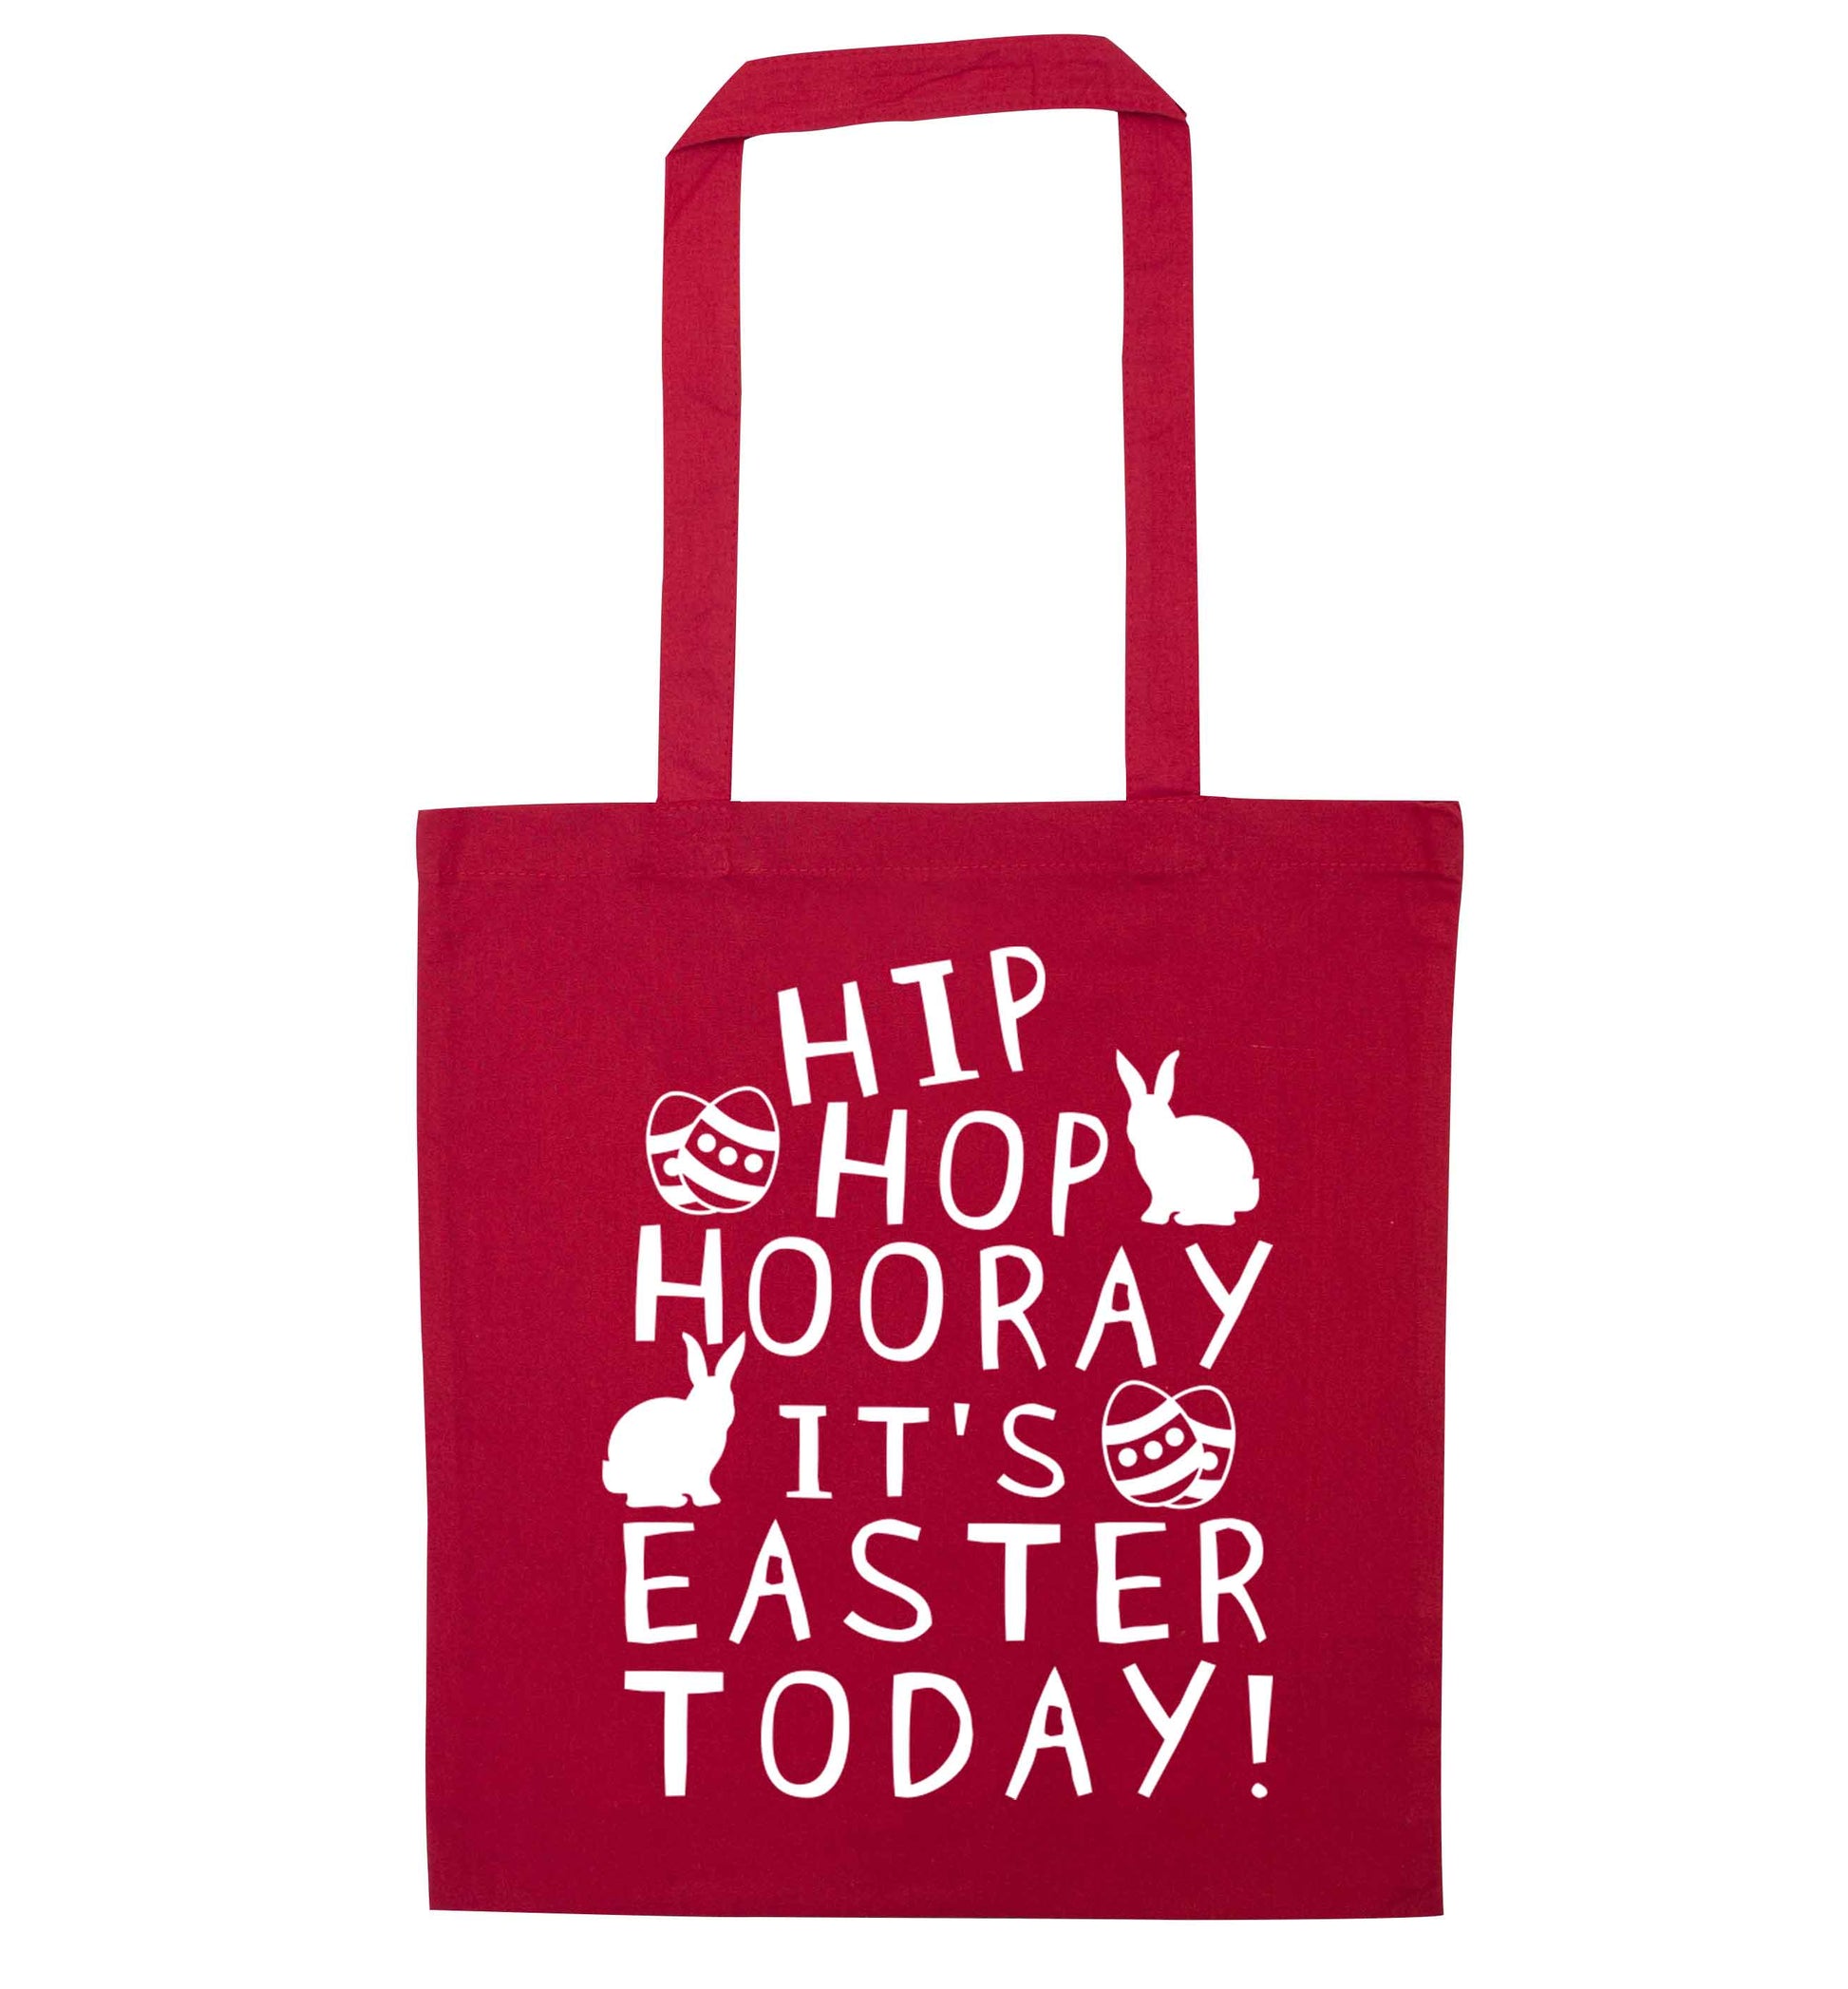 Hip hip hooray it's Easter today! red tote bag